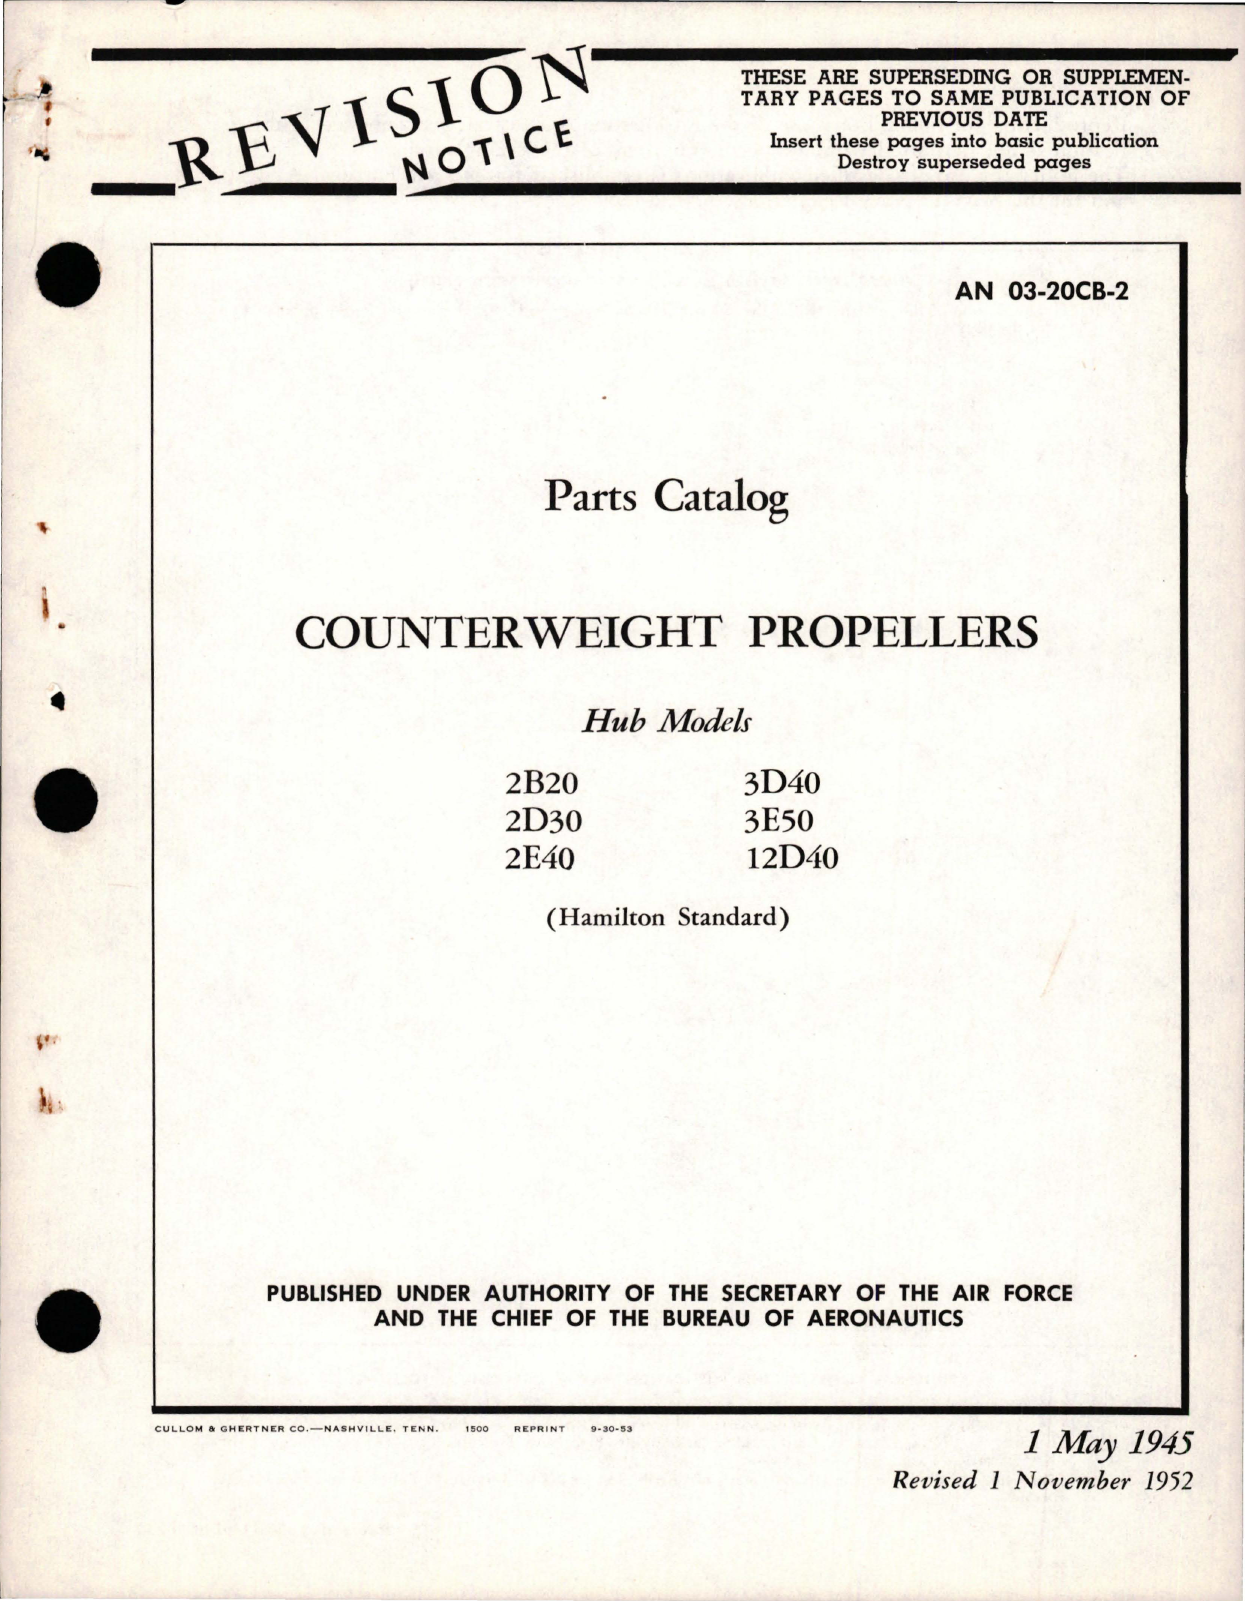 Sample page 1 from AirCorps Library document: Parts Catalog for Counterweight Propellers - Hub Models 2B20, 2D30, 2E40, 3D40, 3E50, and 12D40